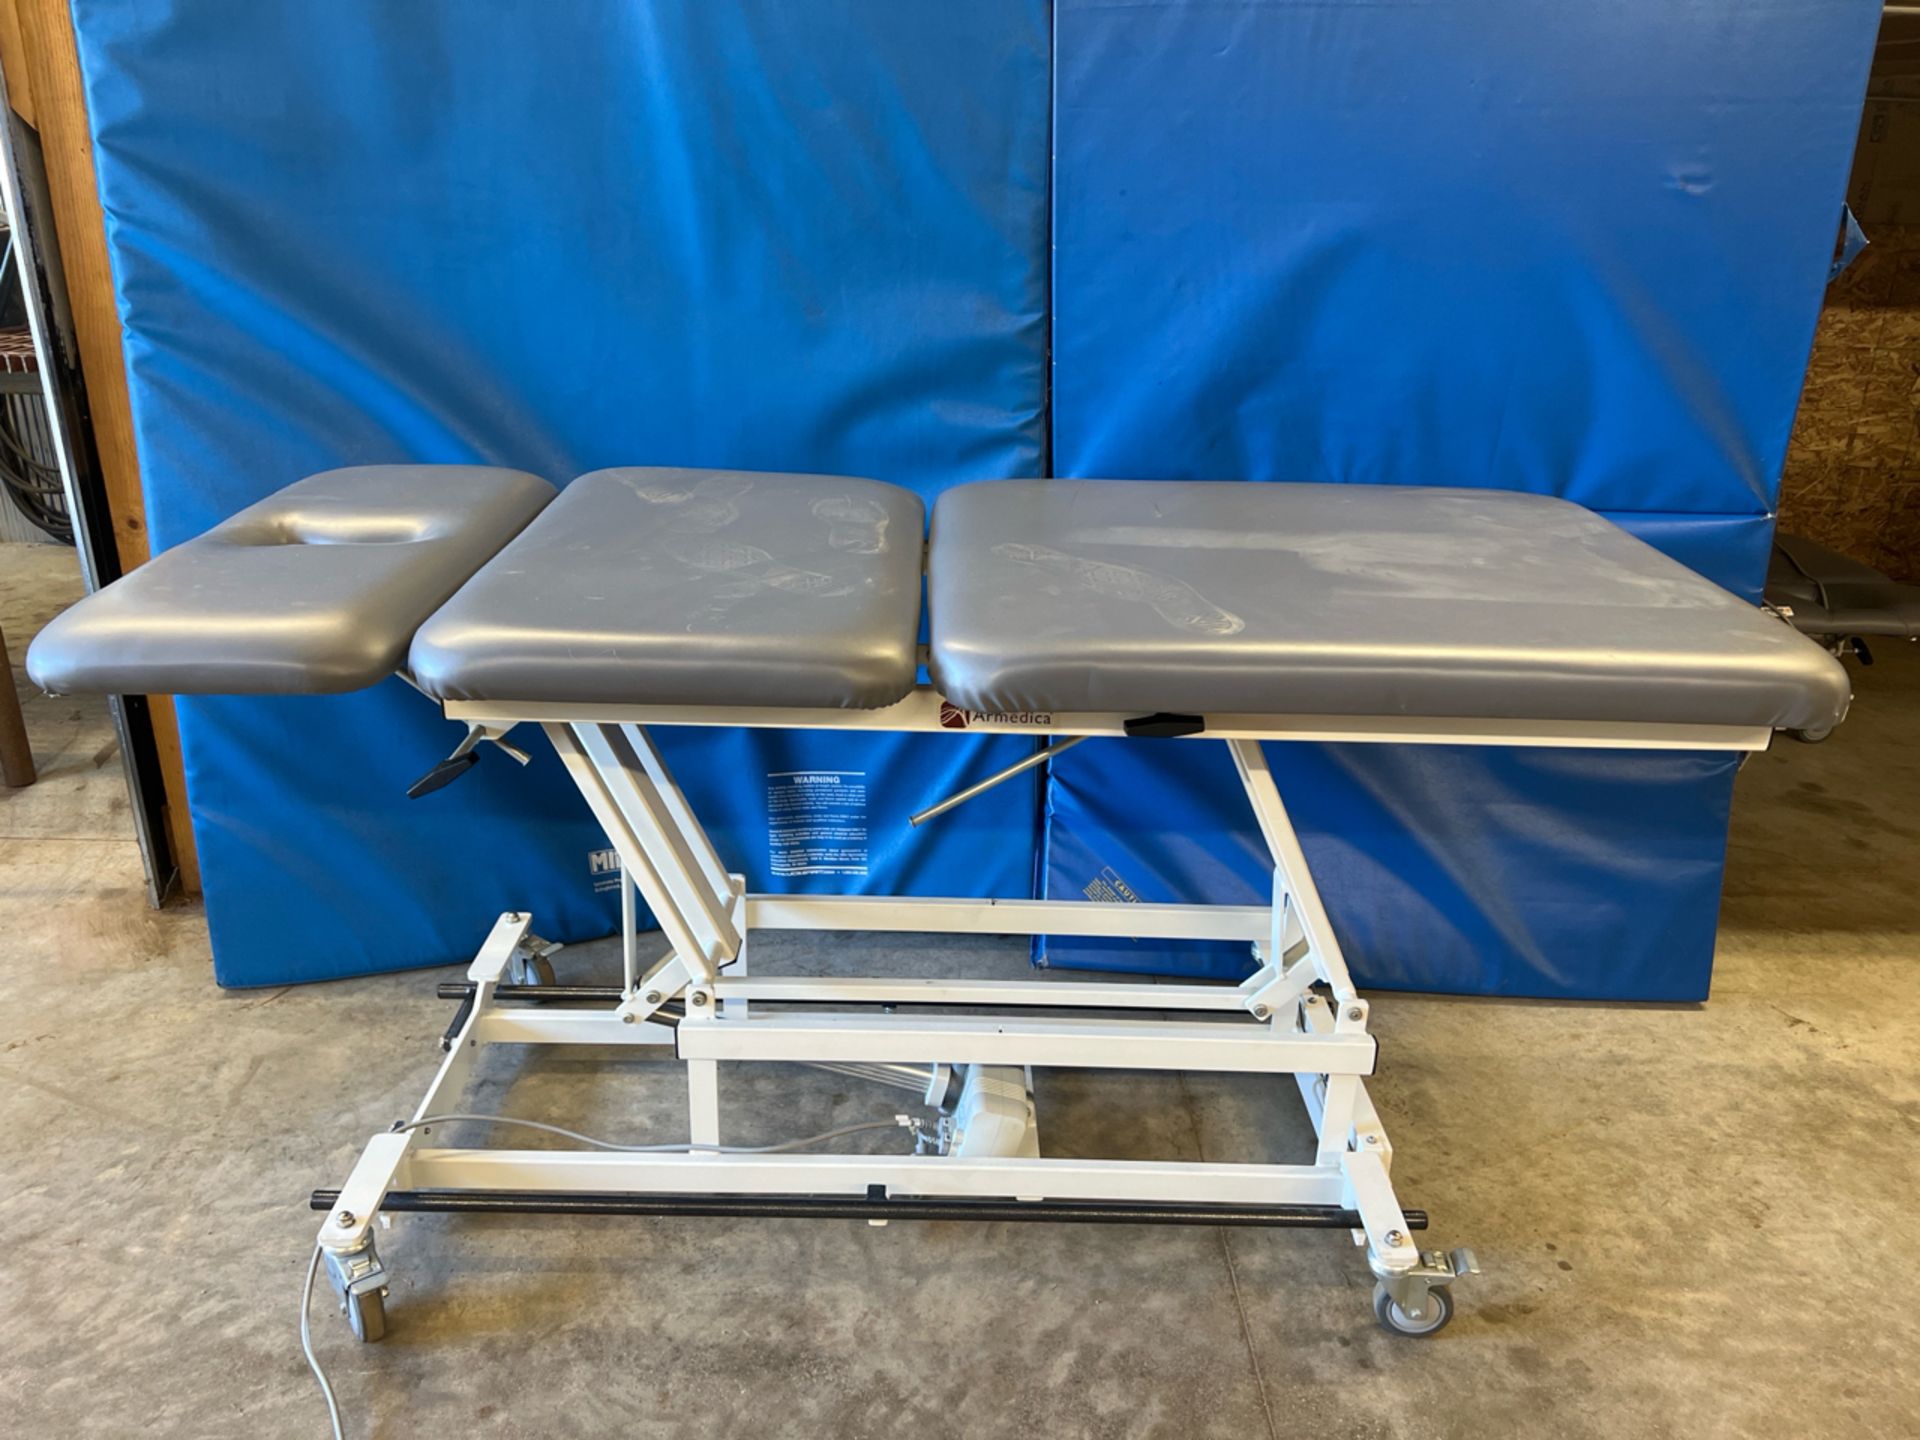 ARMEDICA AMBA334 POWER THERAPY TABLE WITH INTEGRATED FOOT CONTROL - Image 2 of 3